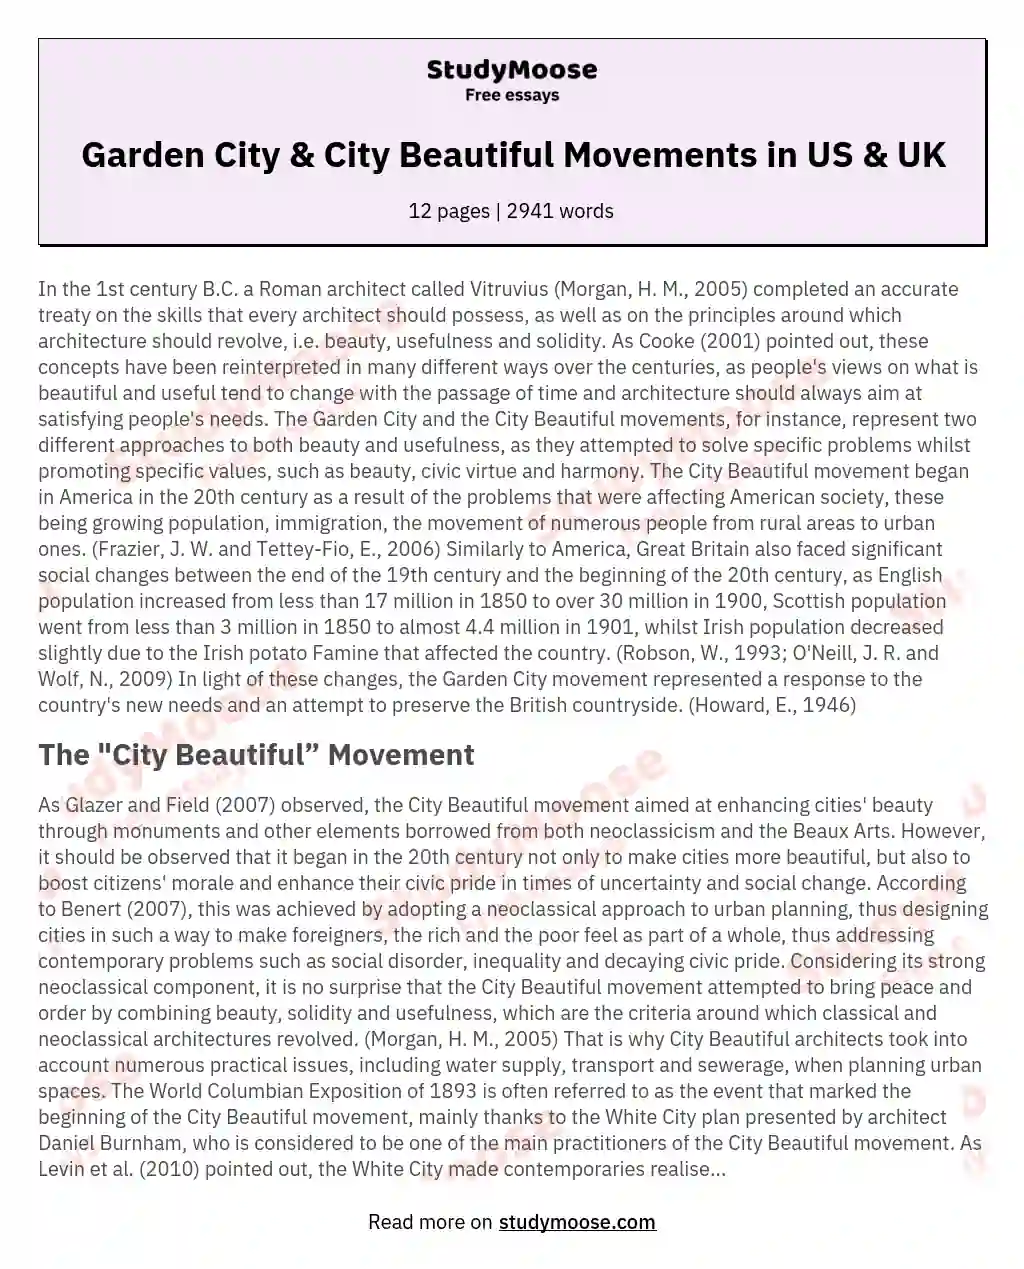 The Movements of The Garden City and City Beautiful in the American and British Eras